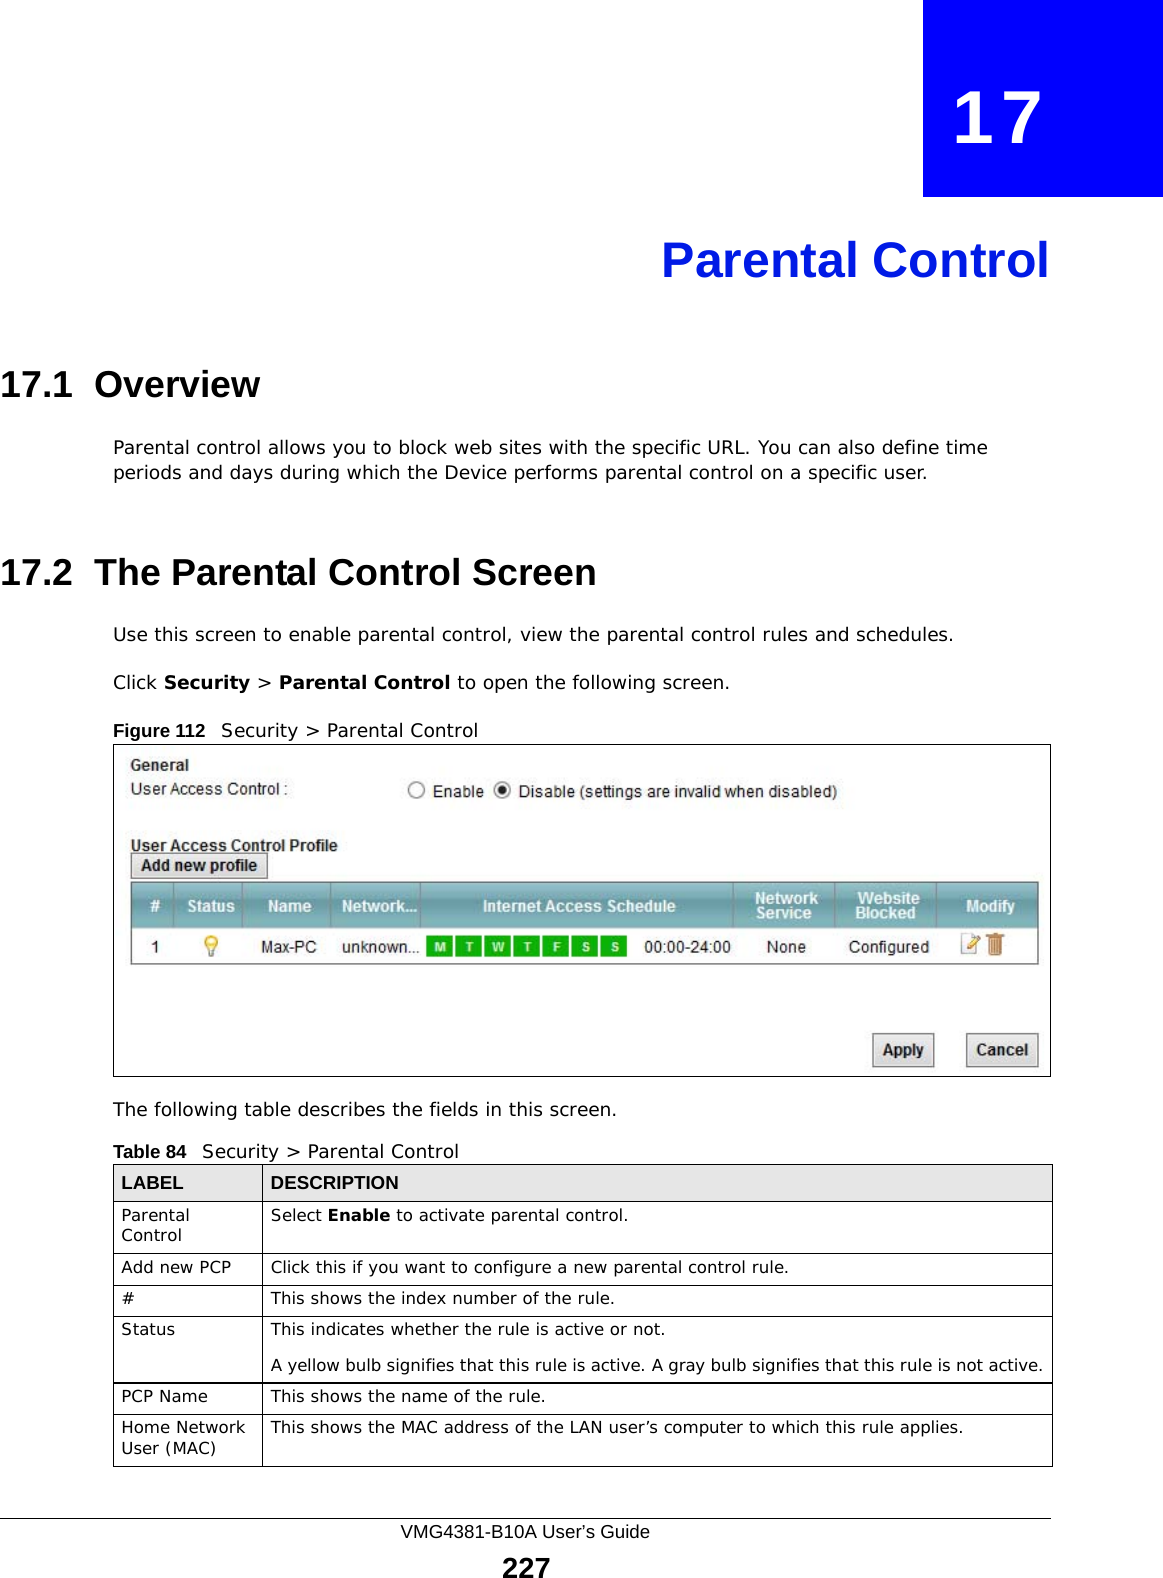 VMG4381-B10A User’s Guide227CHAPTER   17Parental Control17.1  OverviewParental control allows you to block web sites with the specific URL. You can also define time periods and days during which the Device performs parental control on a specific user. 17.2  The Parental Control ScreenUse this screen to enable parental control, view the parental control rules and schedules.Click Security &gt; Parental Control to open the following screen. Figure 112   Security &gt; Parental Control The following table describes the fields in this screen. Table 84   Security &gt; Parental ControlLABEL DESCRIPTIONParental Control Select Enable to activate parental control.Add new PCP Click this if you want to configure a new parental control rule.#This shows the index number of the rule.Status This indicates whether the rule is active or not.A yellow bulb signifies that this rule is active. A gray bulb signifies that this rule is not active.PCP Name This shows the name of the rule.Home Network User (MAC) This shows the MAC address of the LAN user’s computer to which this rule applies.